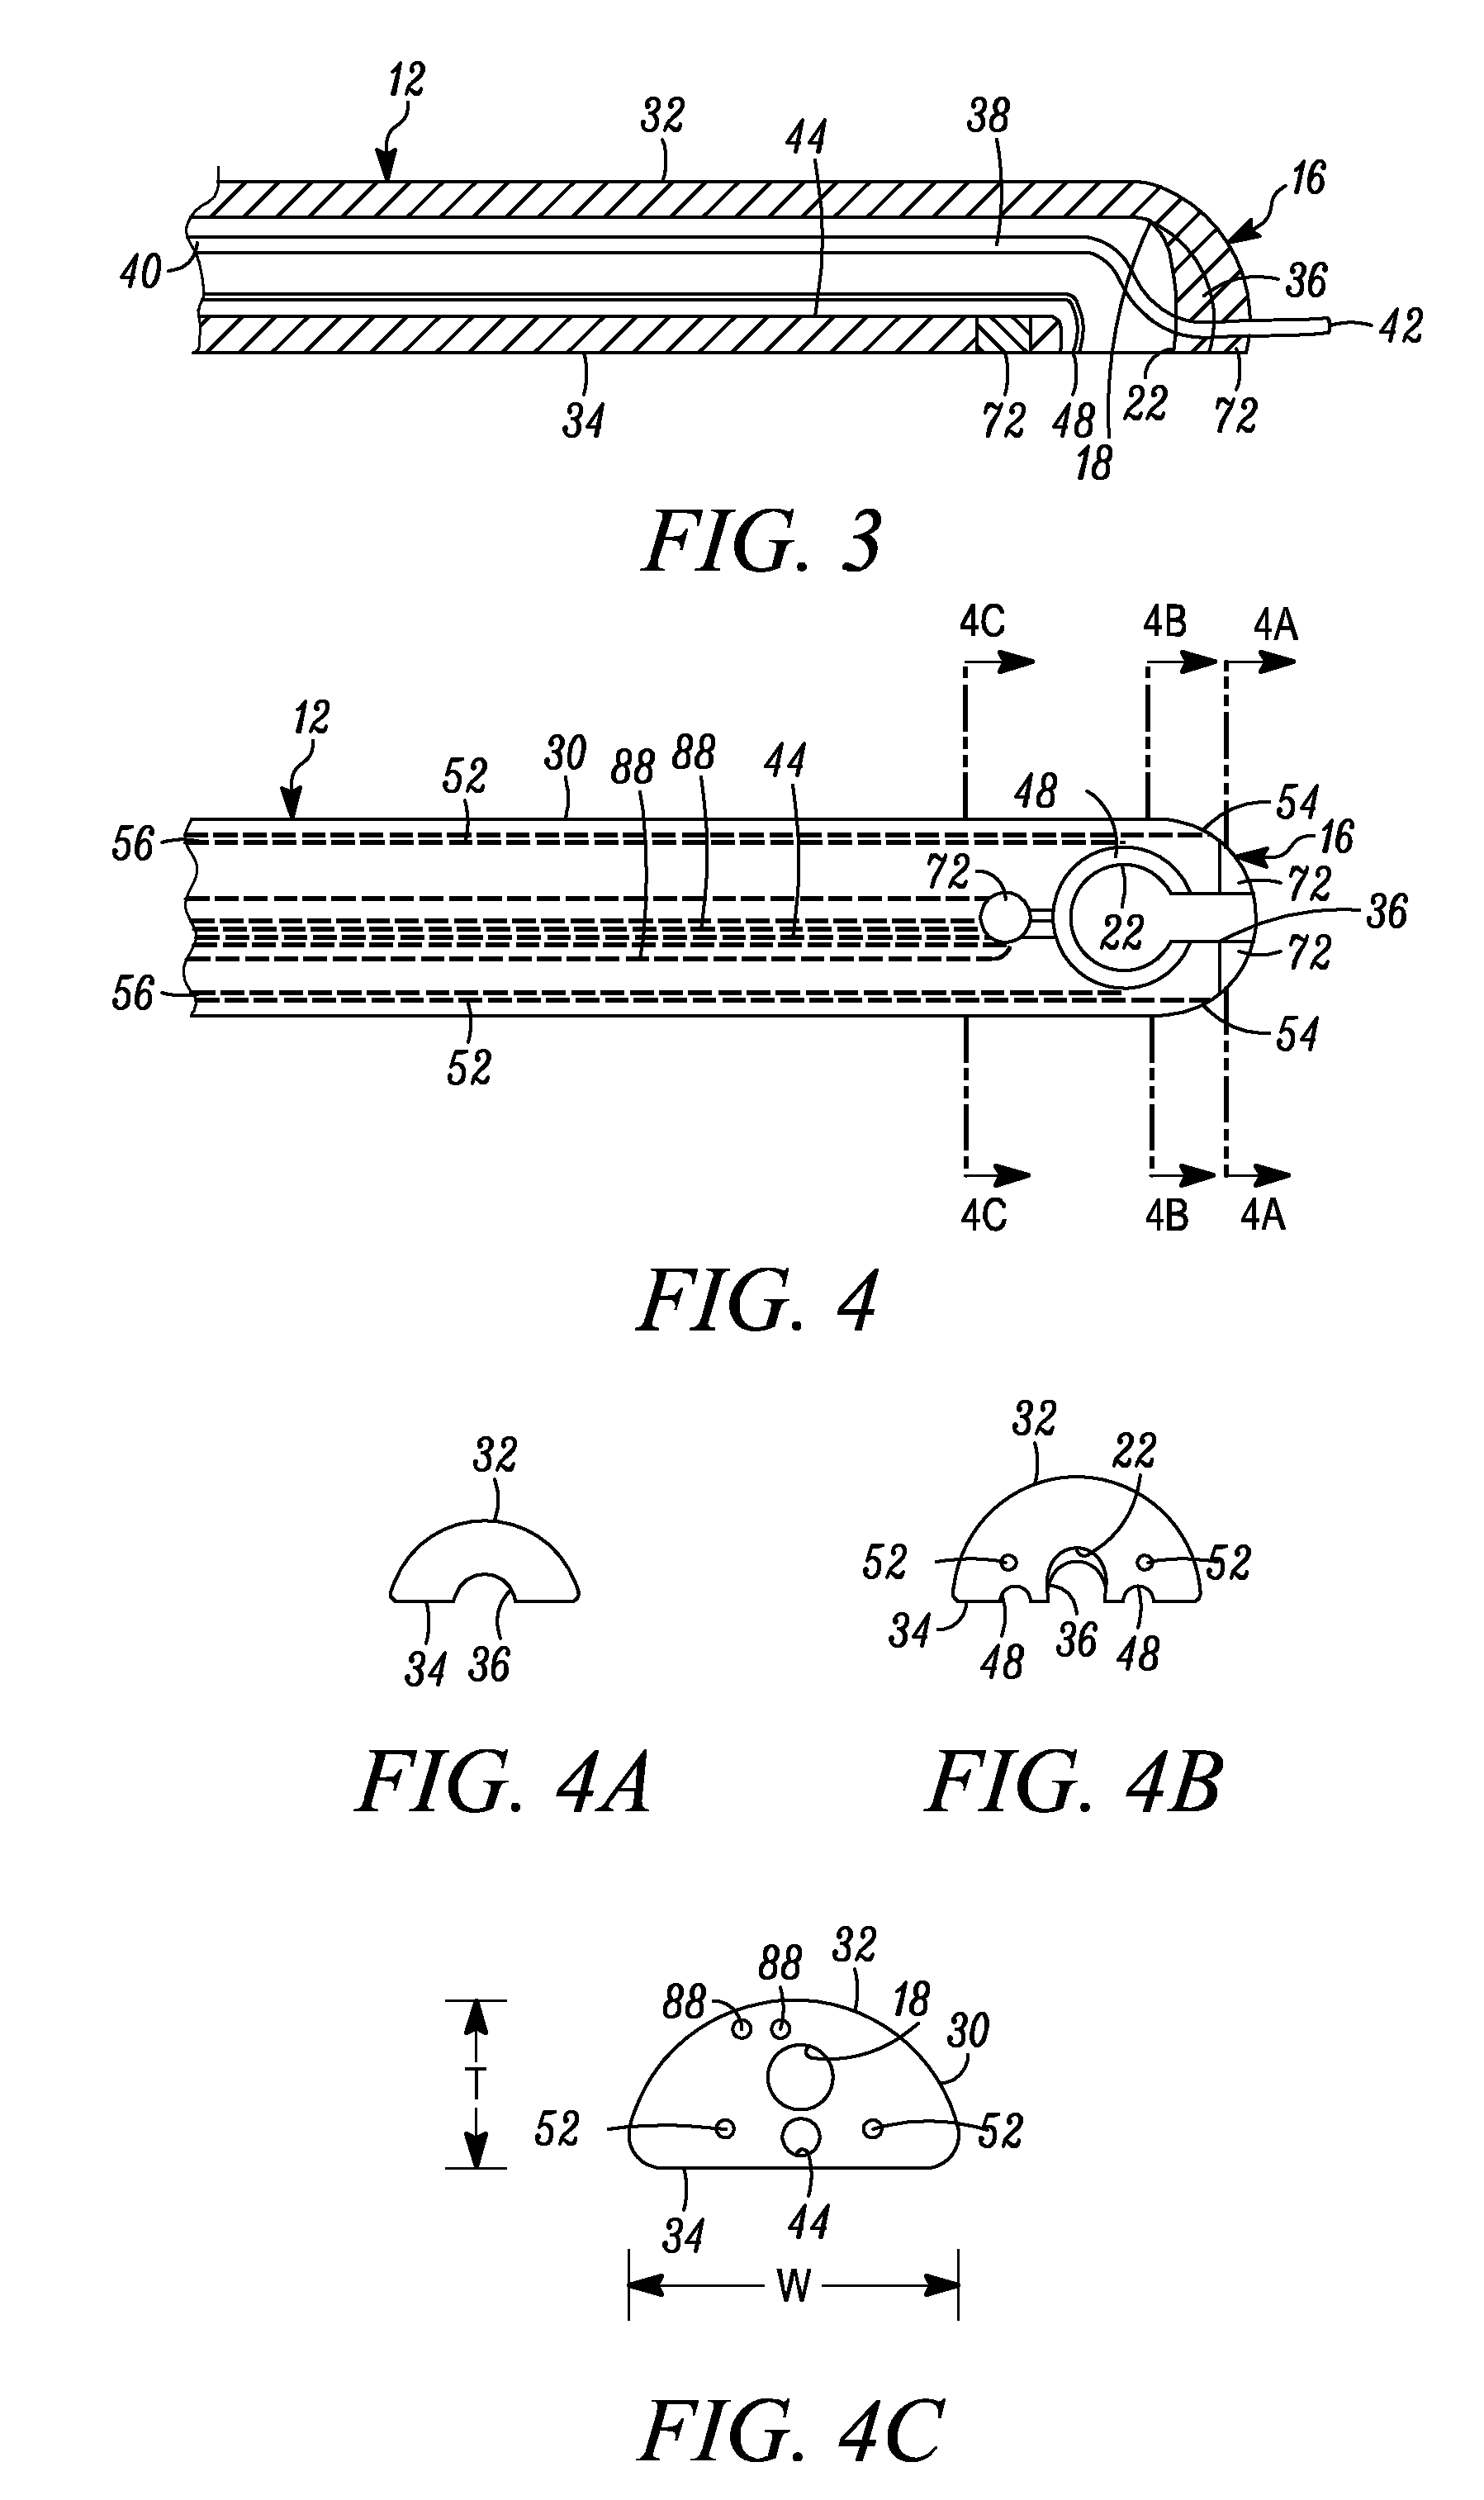 Methods and apparatus for lead placement on a surface of the heart